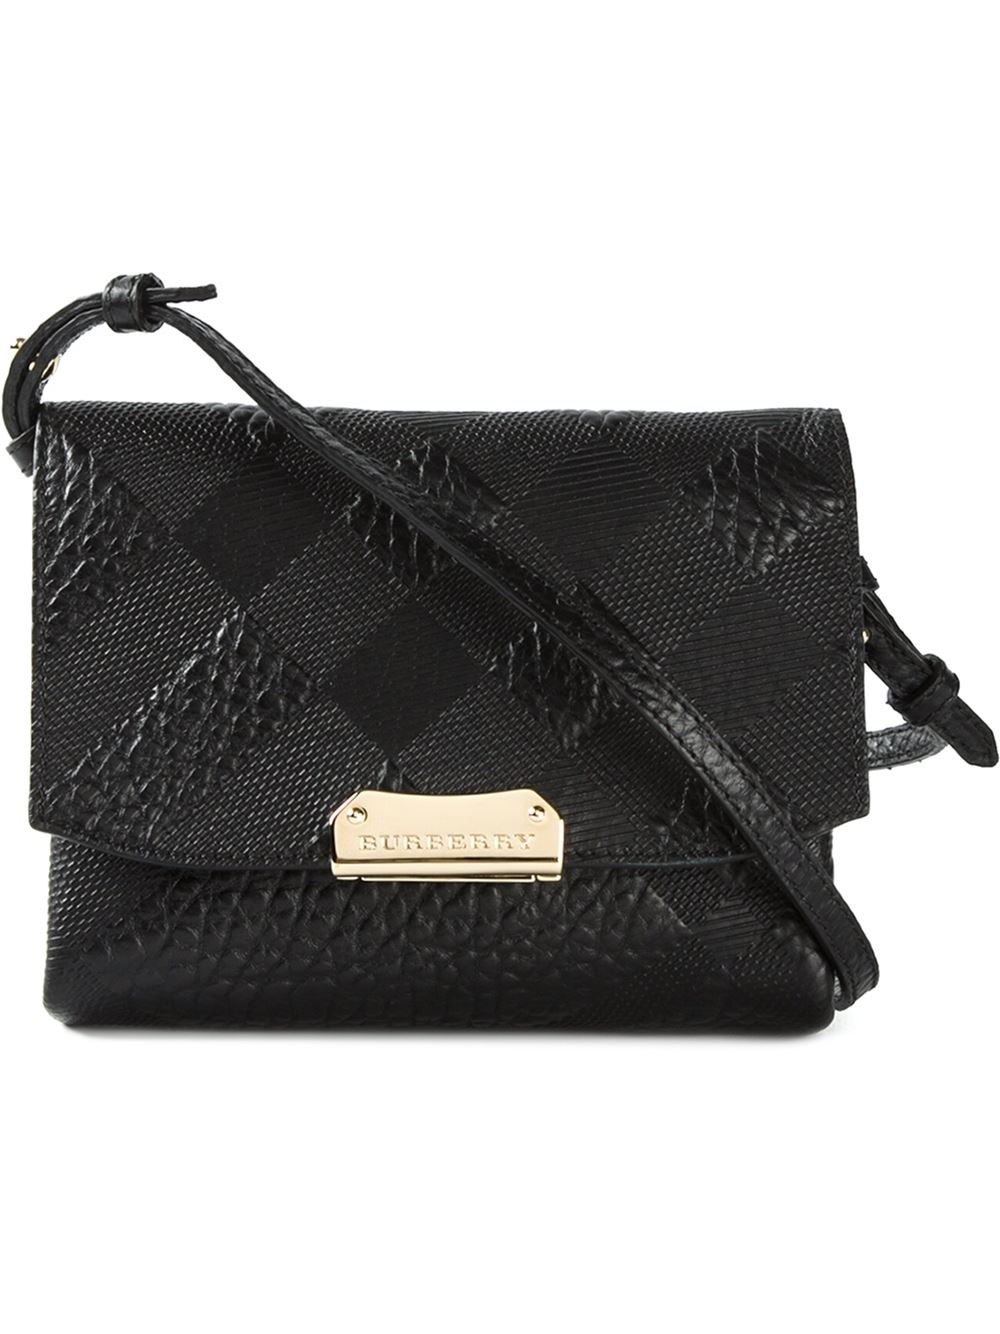 Lyst - Burberry Embossed-Check Leather Cross-Body Bag in Black